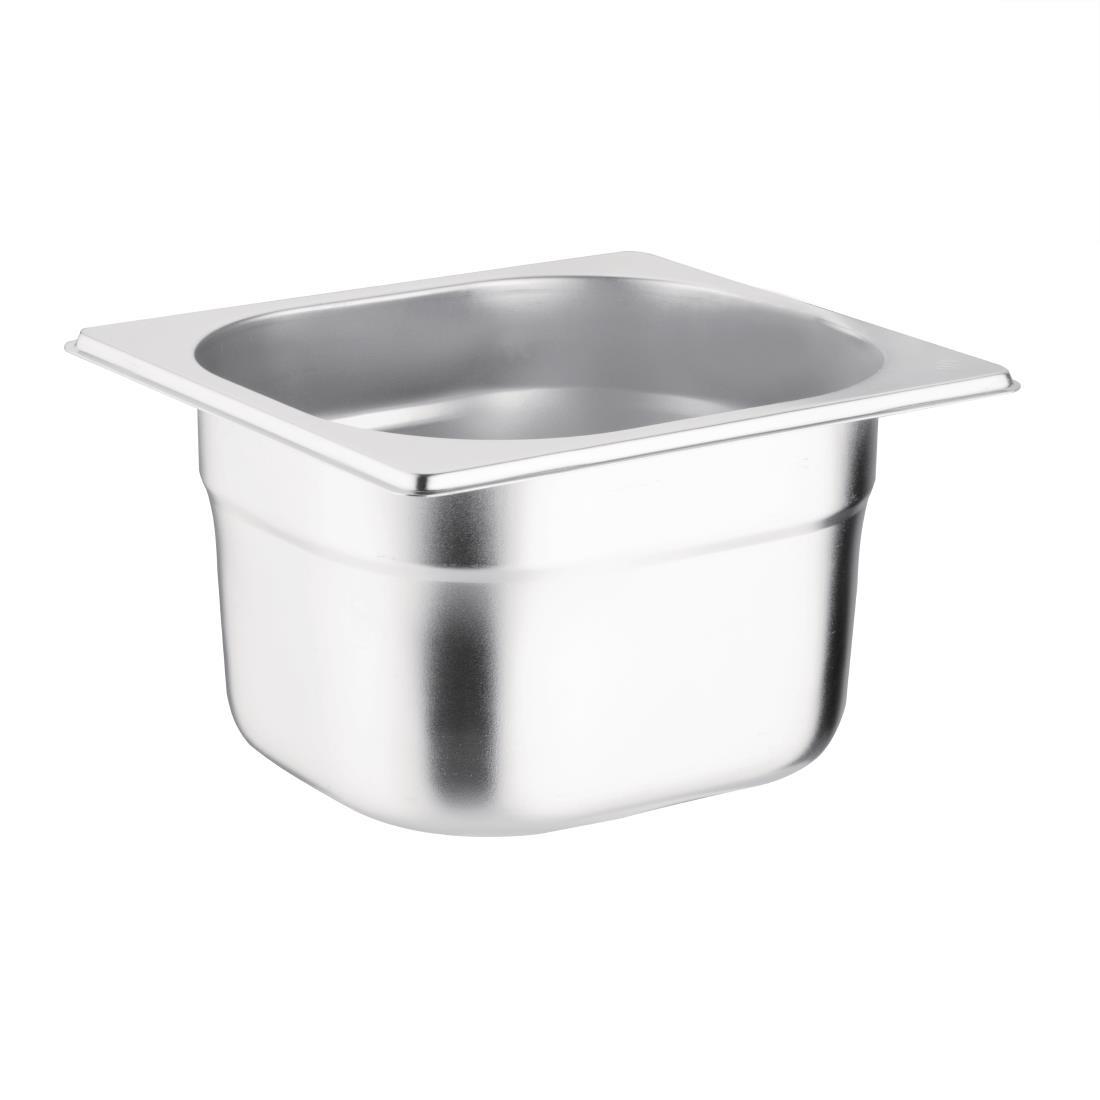 Vogue Stainless Steel 1/6 Gastronorm Pan 100mm - K991  - 1